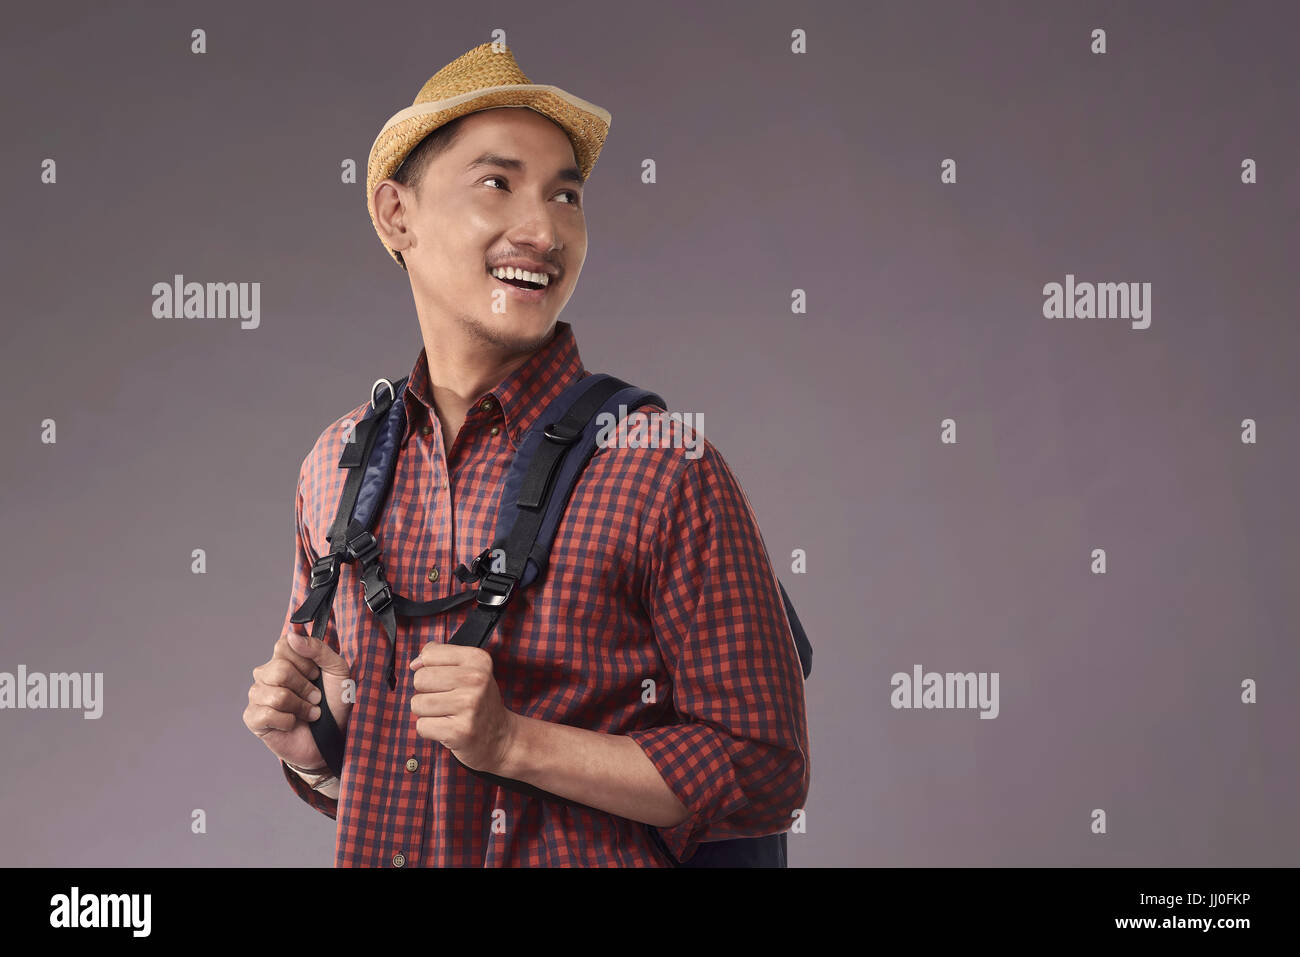 Handsome asian tourist with hat and backpack over dark background Stock Photo